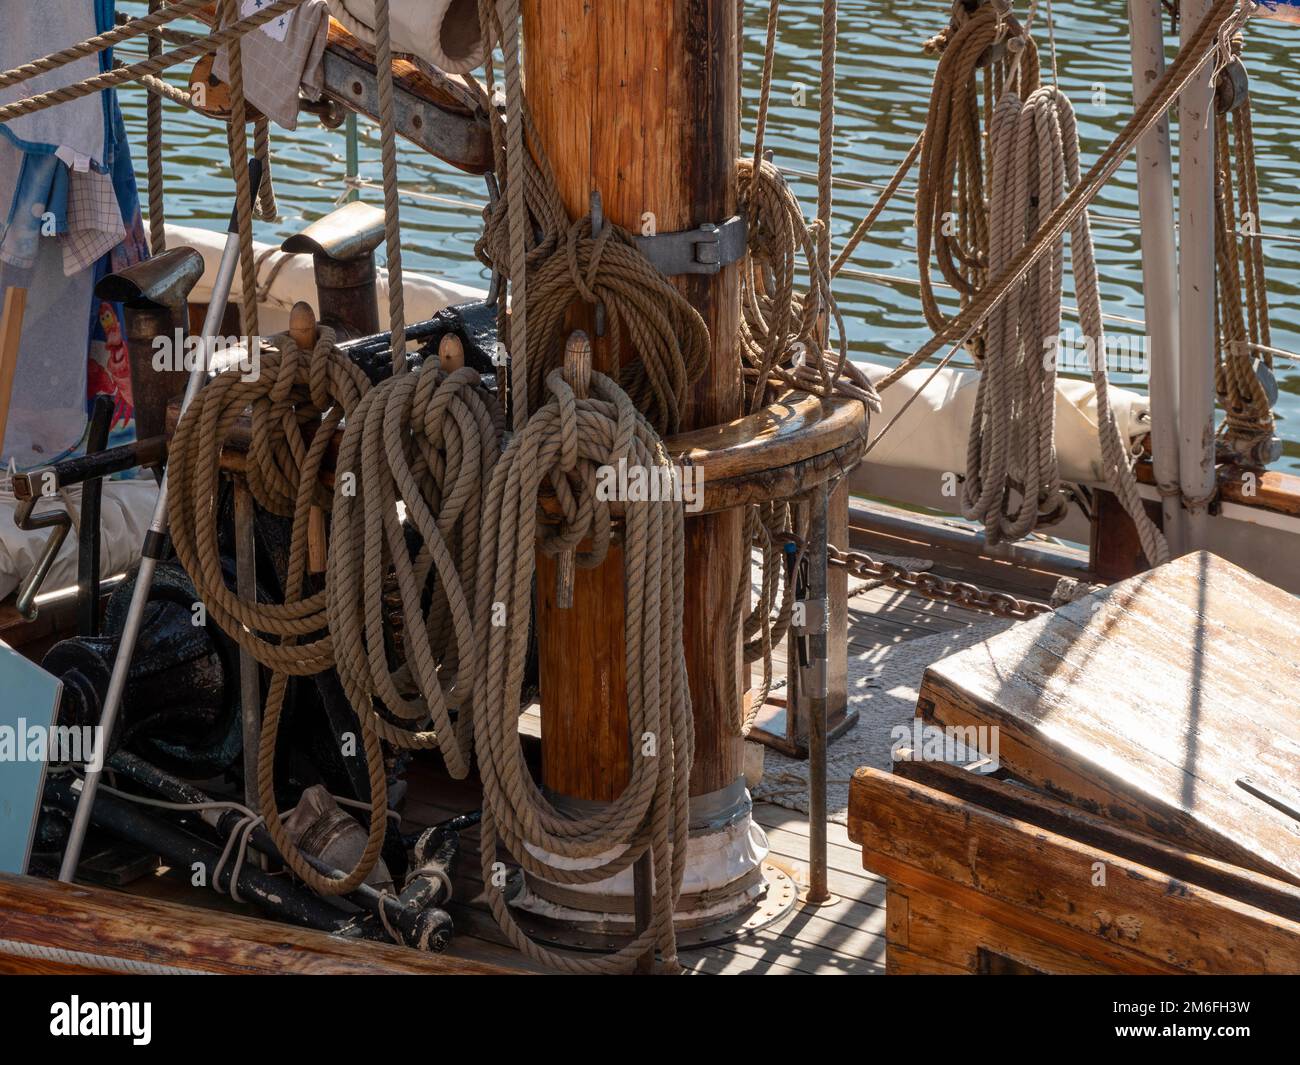 Shipping Ropes stock photo. Image of masts, peoples, cord